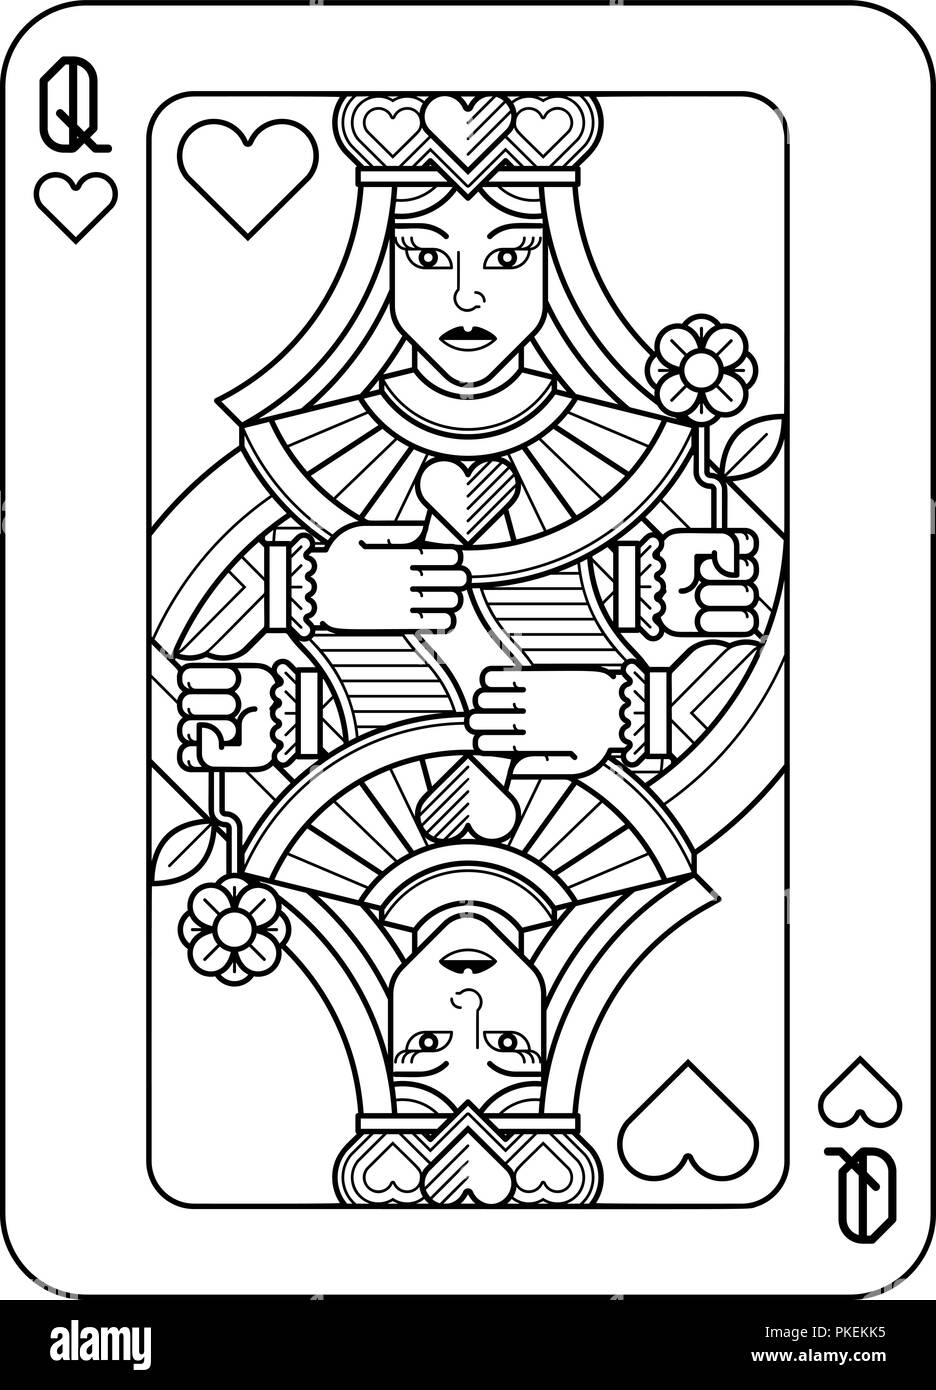 Playing Card Queen of Hearts Black and White Stock Vector